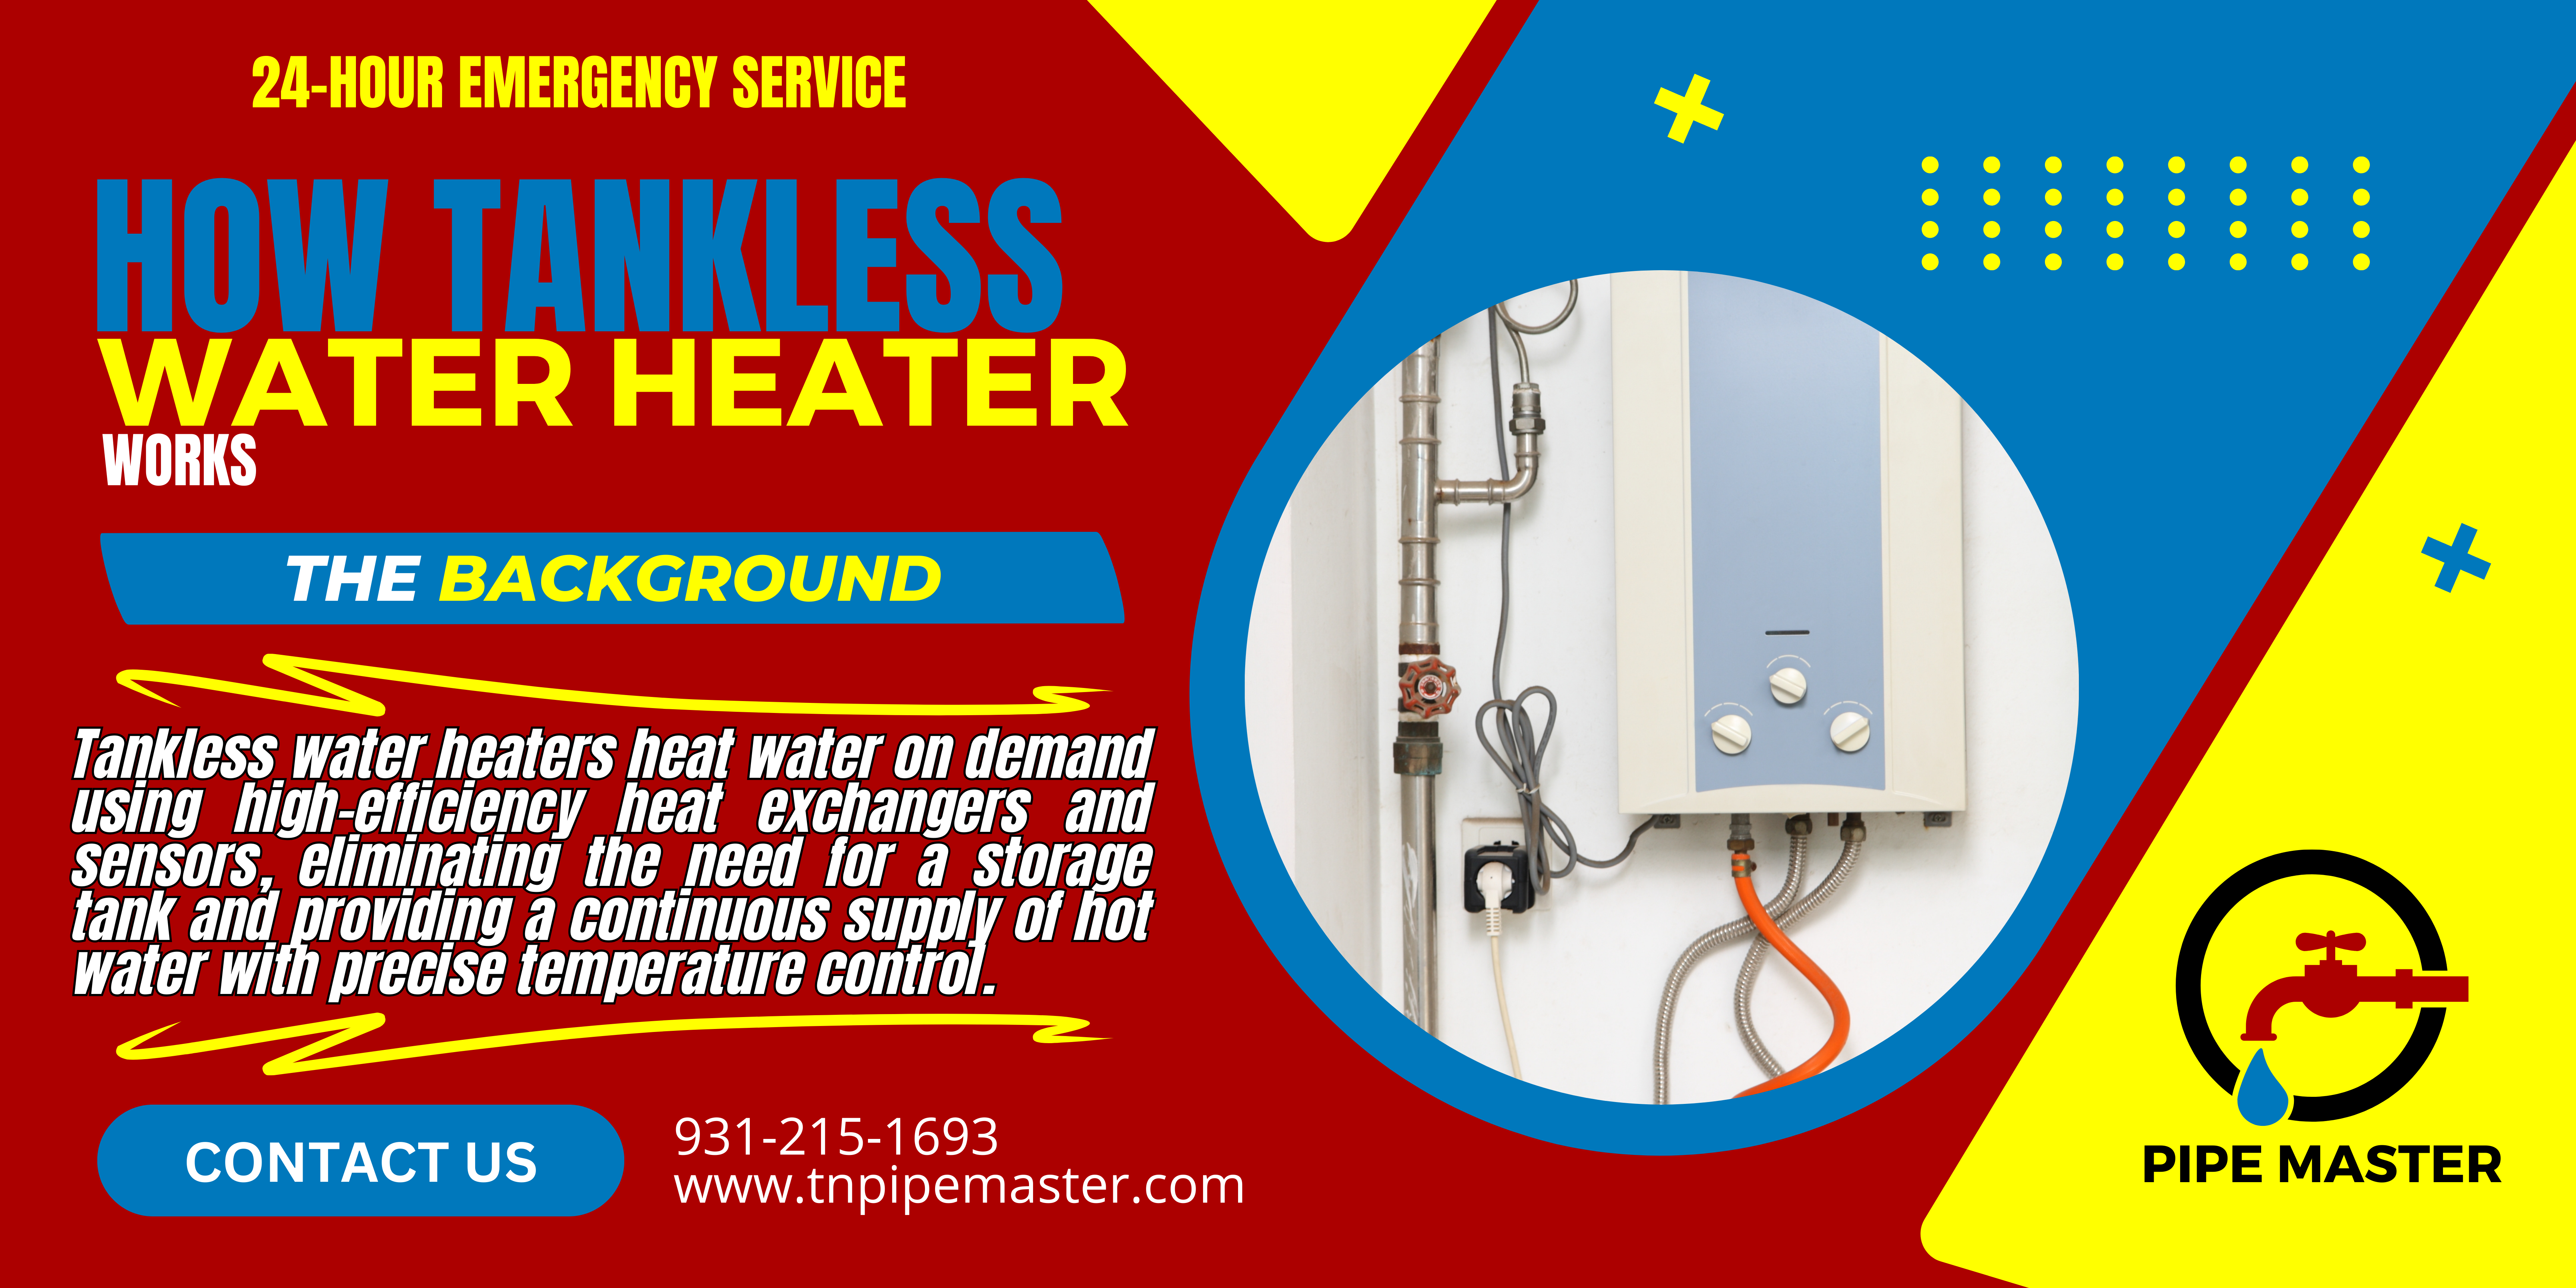 Inner Workings and Advantages of Tankless Water Heaters